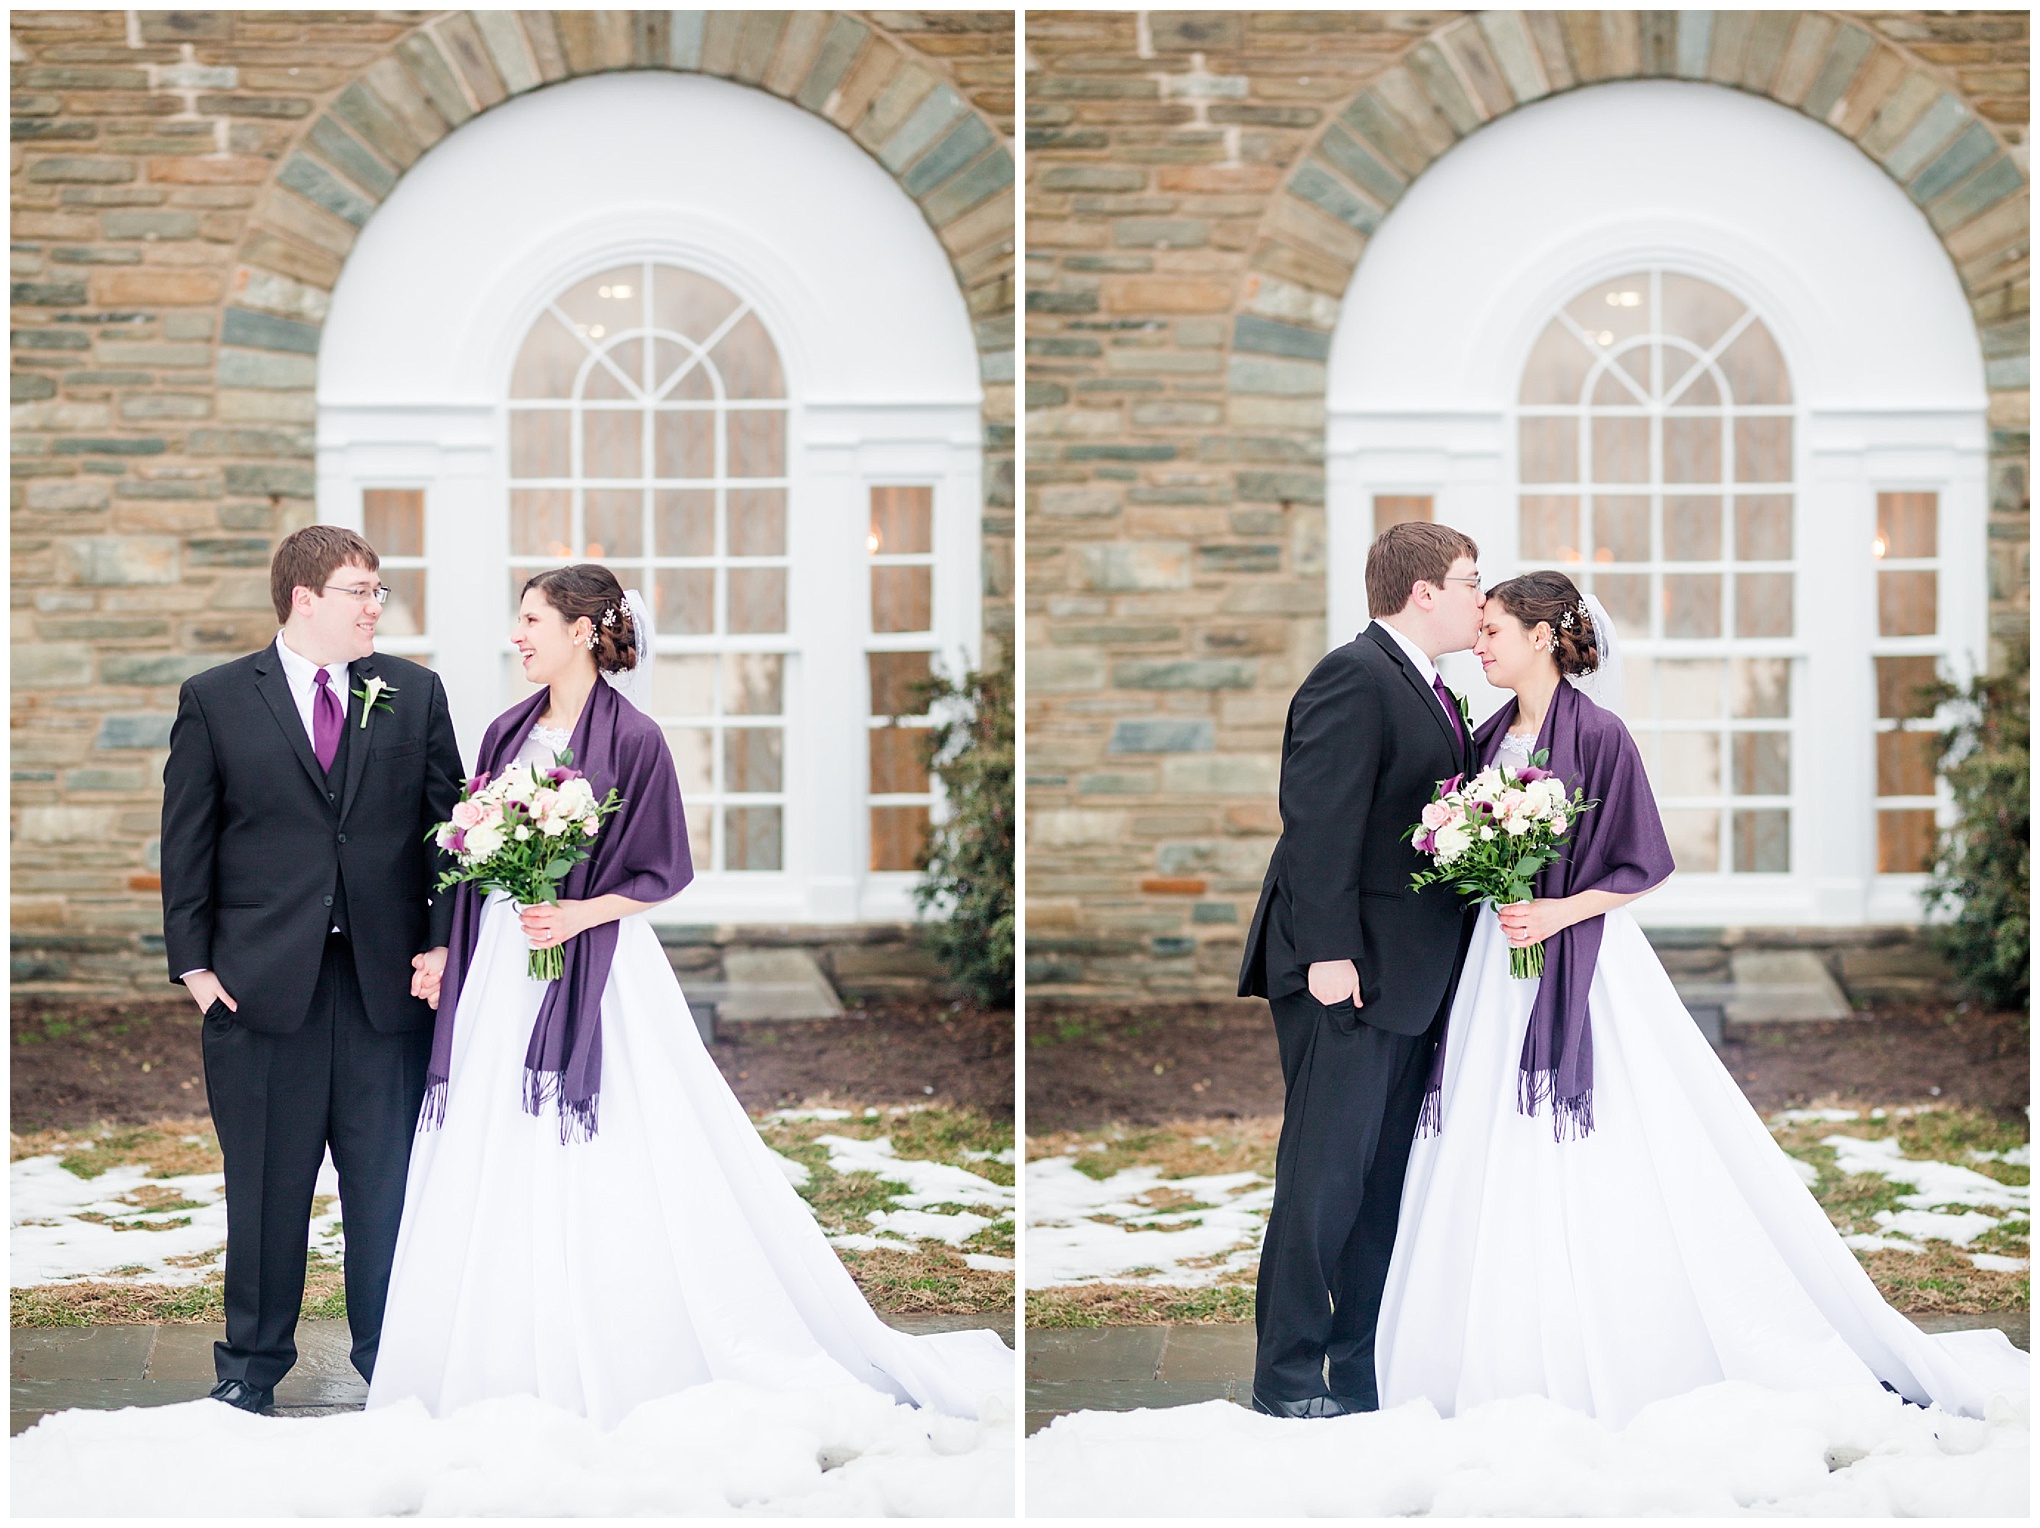 classic winter wedding in Maryland, winter wedding, classic winter wedding, classic wedding, elegant couple, purple aesthetic, church wedding, Maryland wedding, Rachel E.H. Photography, Maryland wedding photographer, natural light portraits, couple goals, relationship goals, classic wedding dress, winter white wedding, DC wedding photographer, Glenview Mansion, purple and black